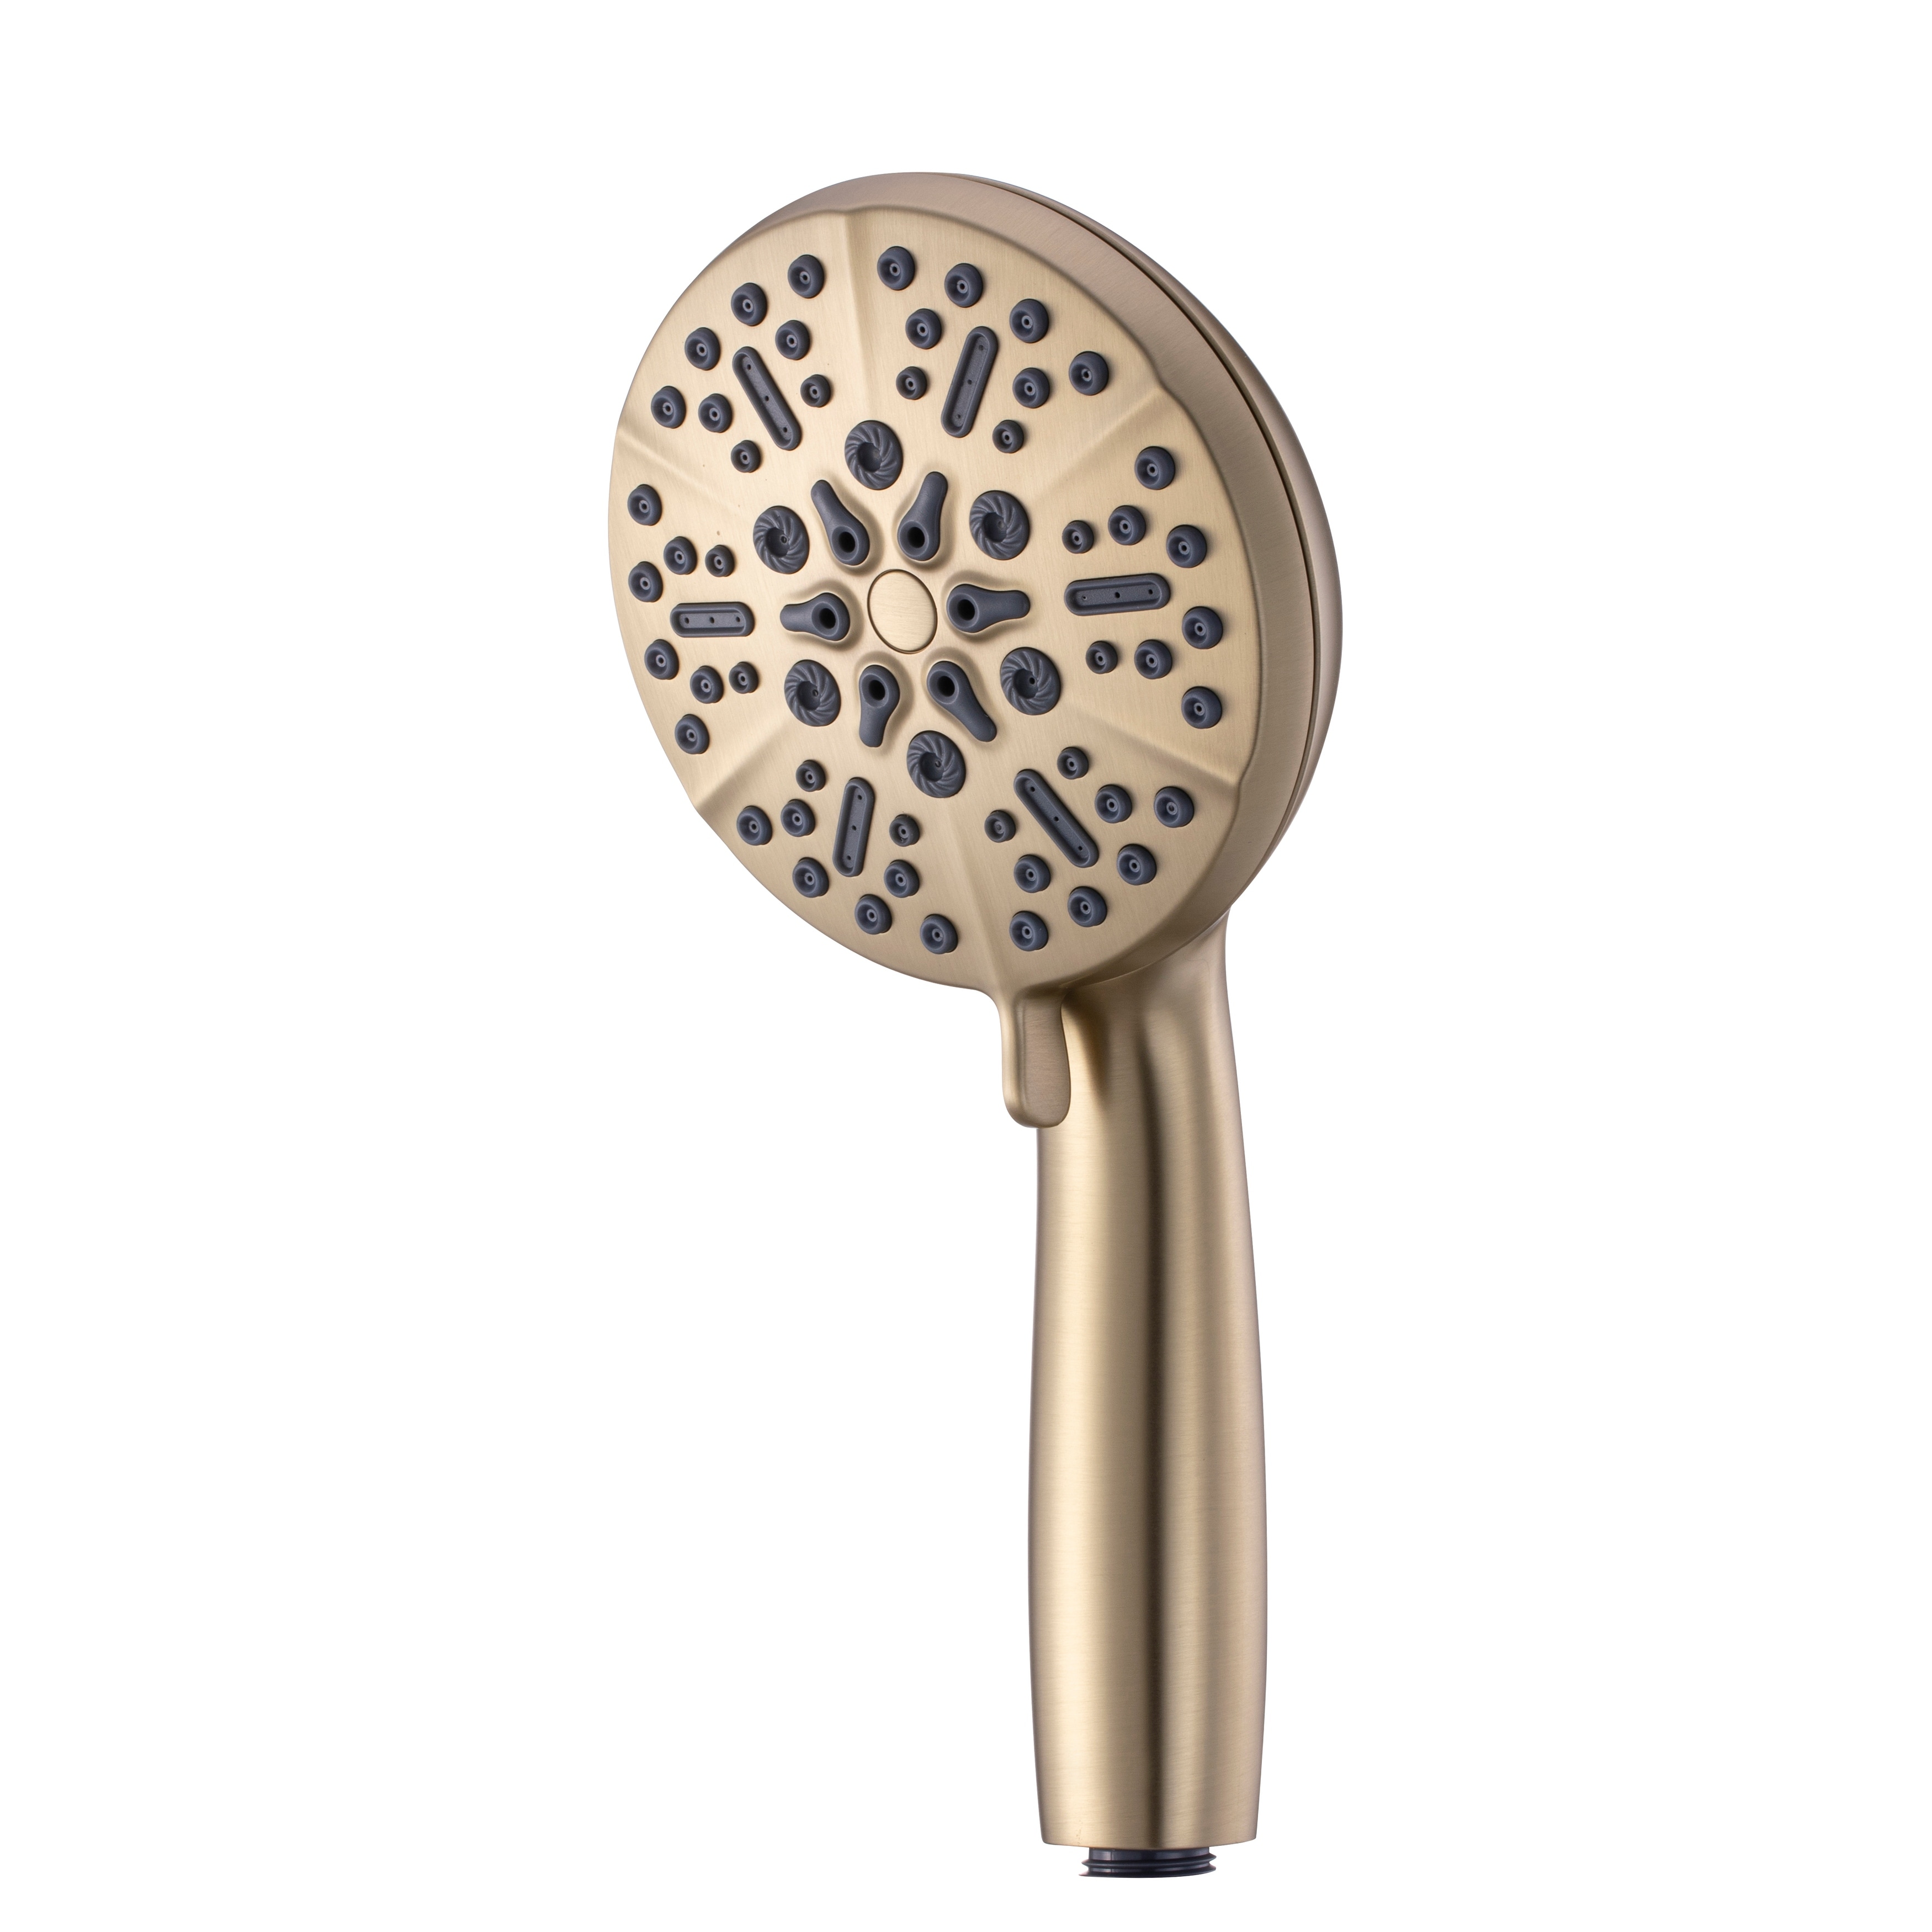 35 Spray Setting 2 in 1 Handheld Shower Heads Combo with Extra Long Stainless Steel Hose Brushed Nickel High Pressure Model 5 Couradric Dual Shower Head 